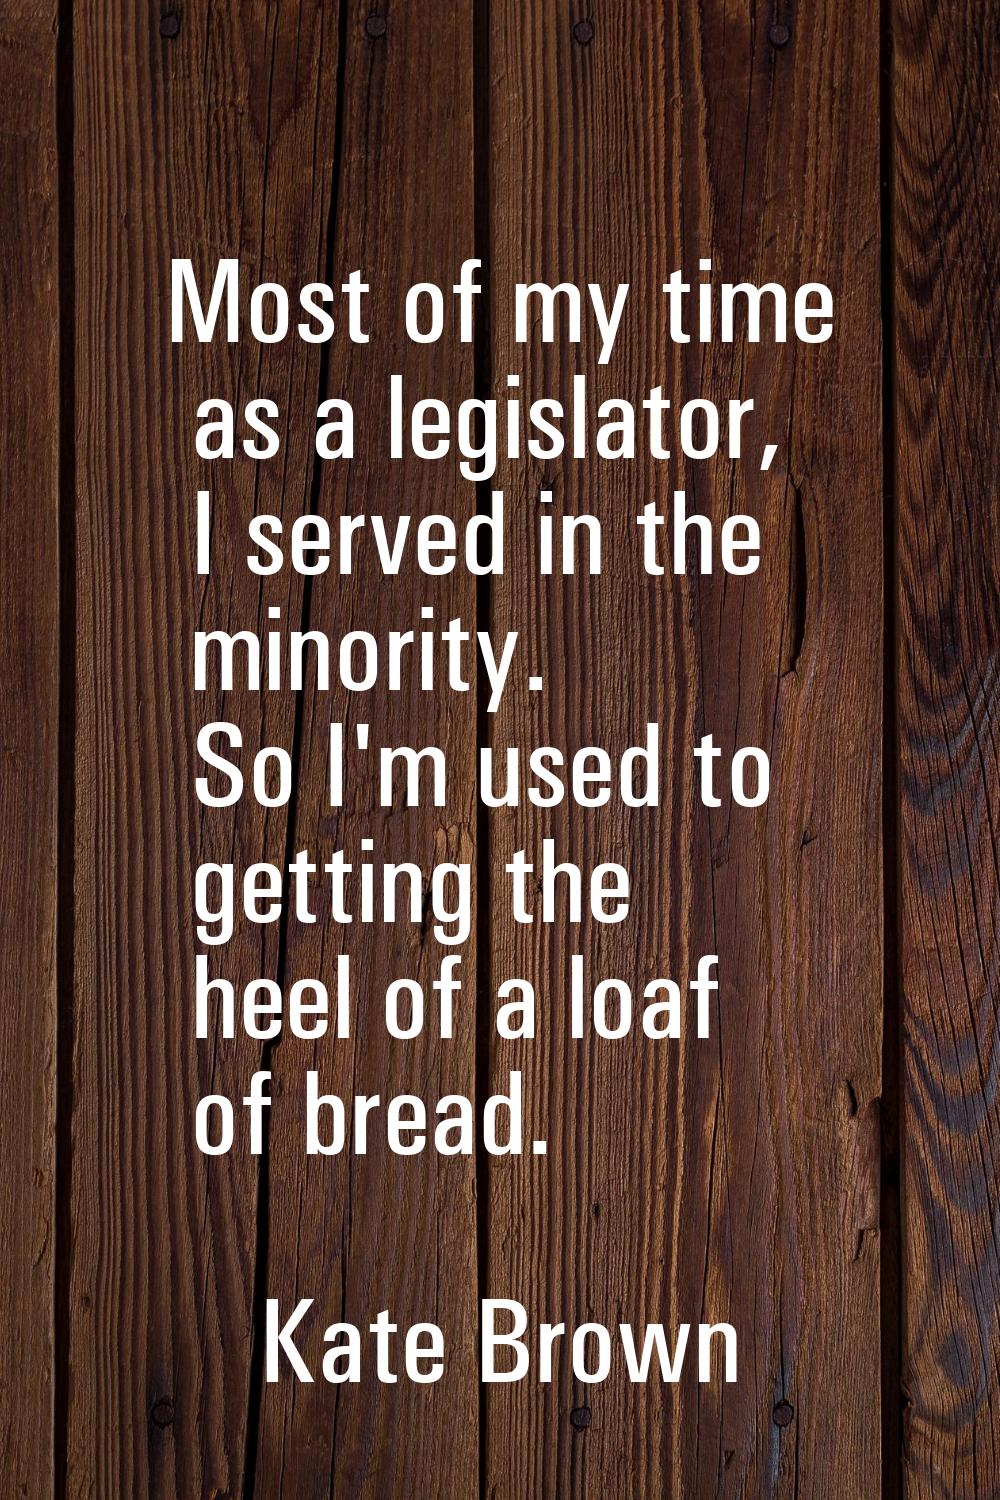 Most of my time as a legislator, I served in the minority. So I'm used to getting the heel of a loa